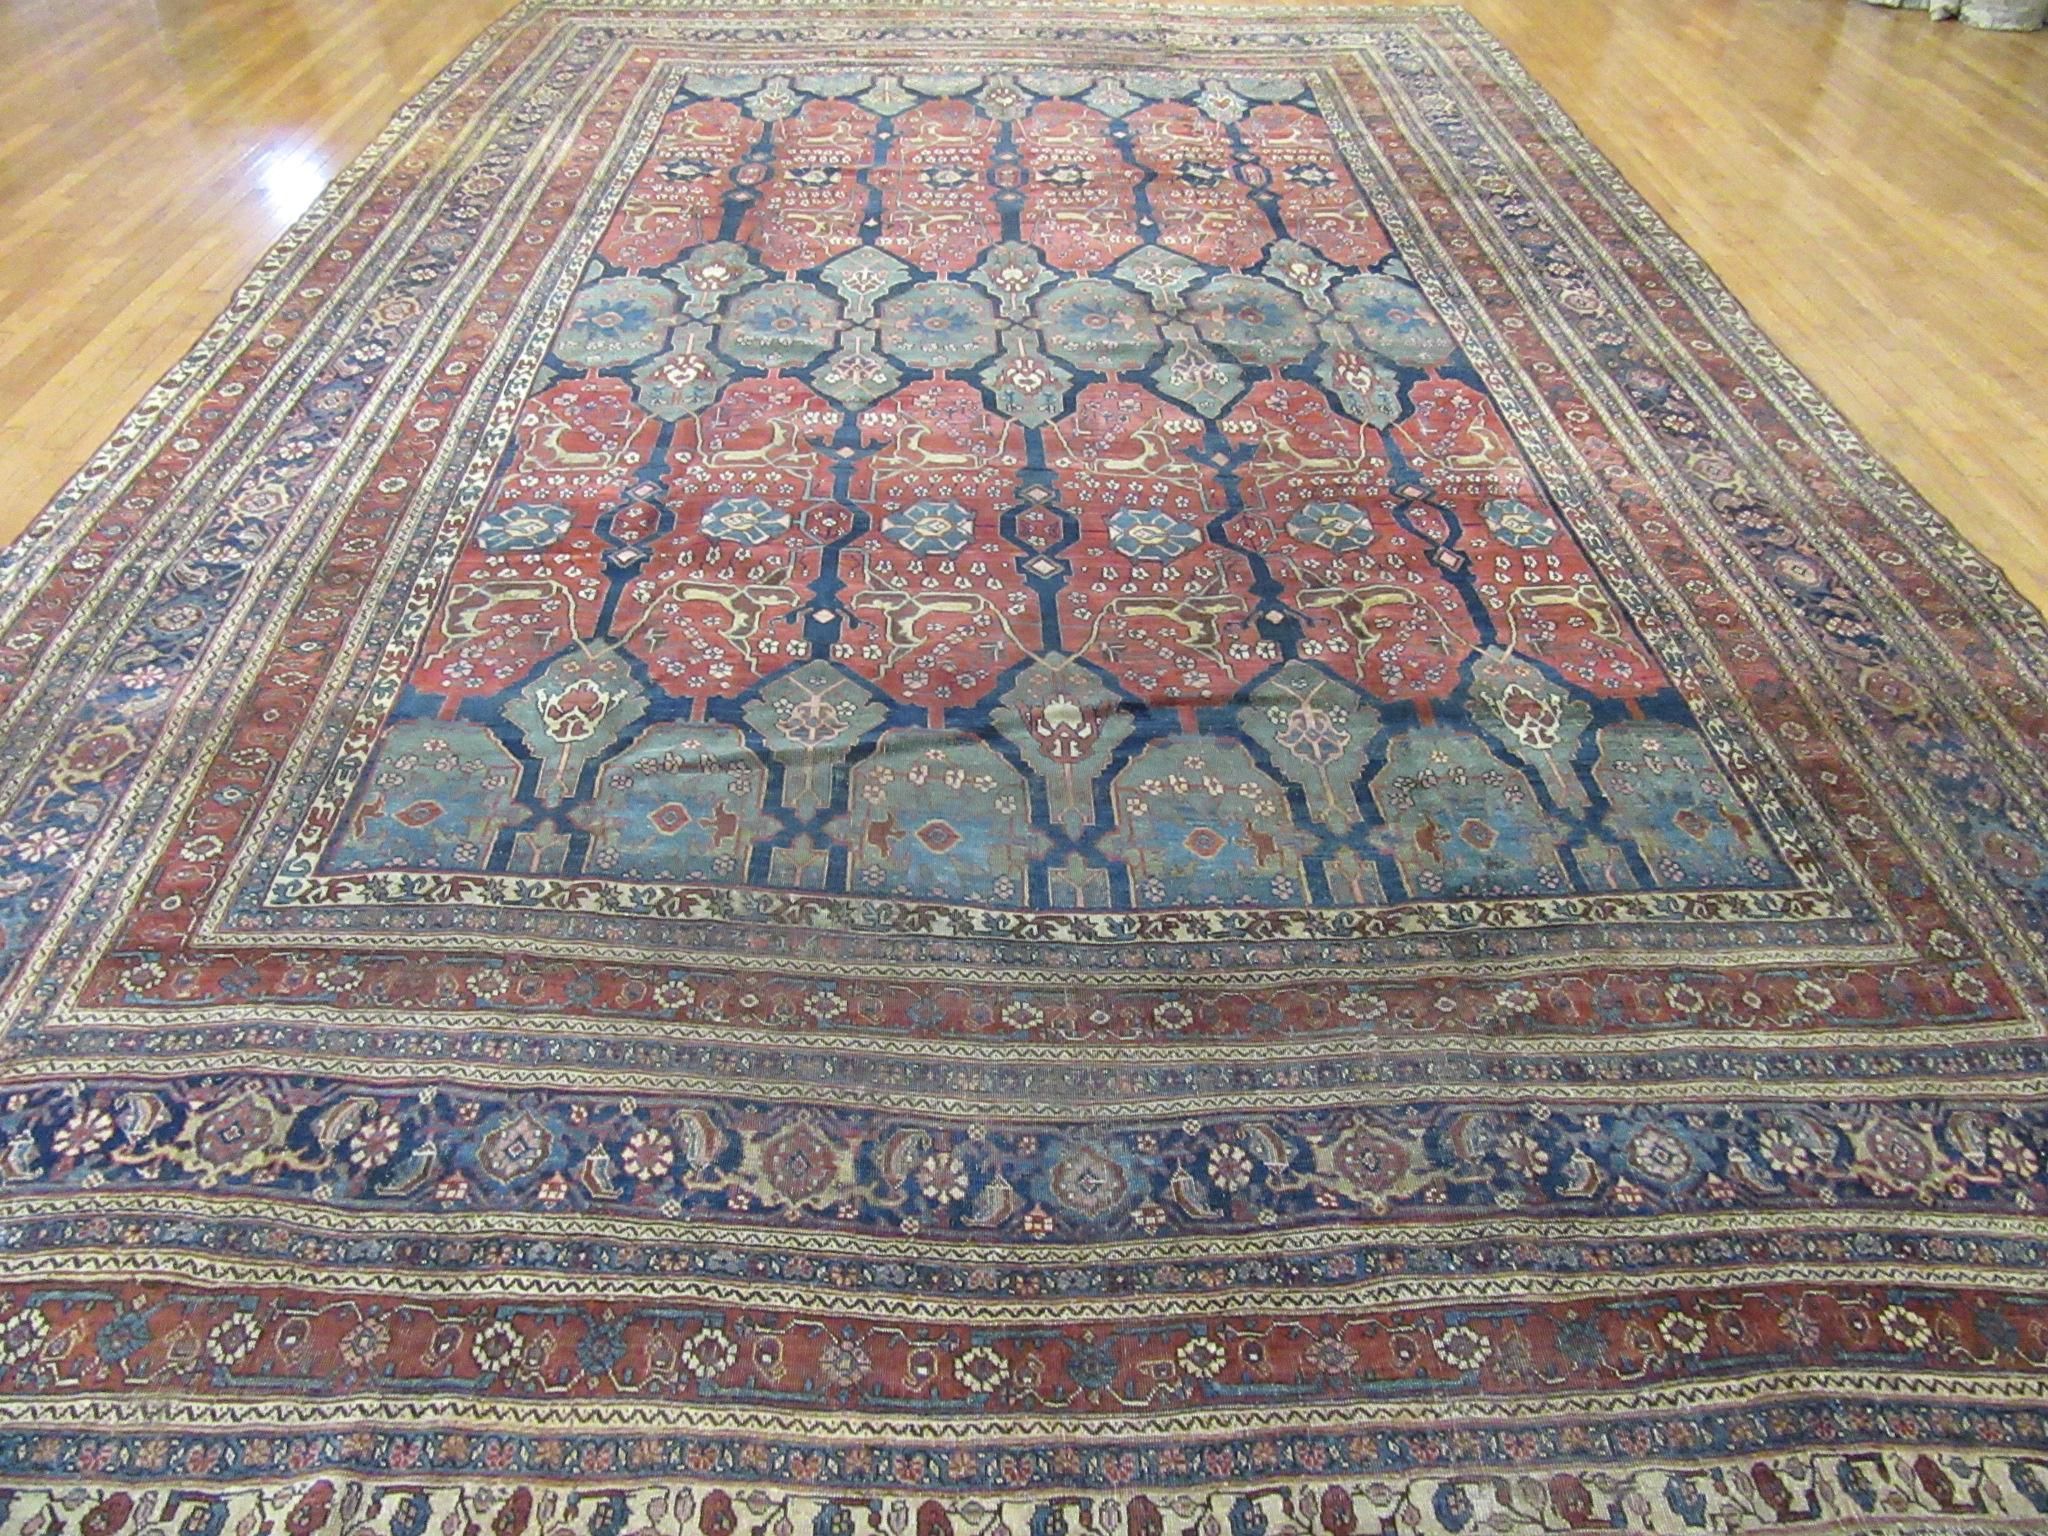 This is a rare late 19th century antique hand-knotted infamous Persian Halwaee Bidjar rug. It has a very unique all-over pattern made with 100% wool and all natural dyes. The rug is in great shape and measures 11' 3'' x 18 '.